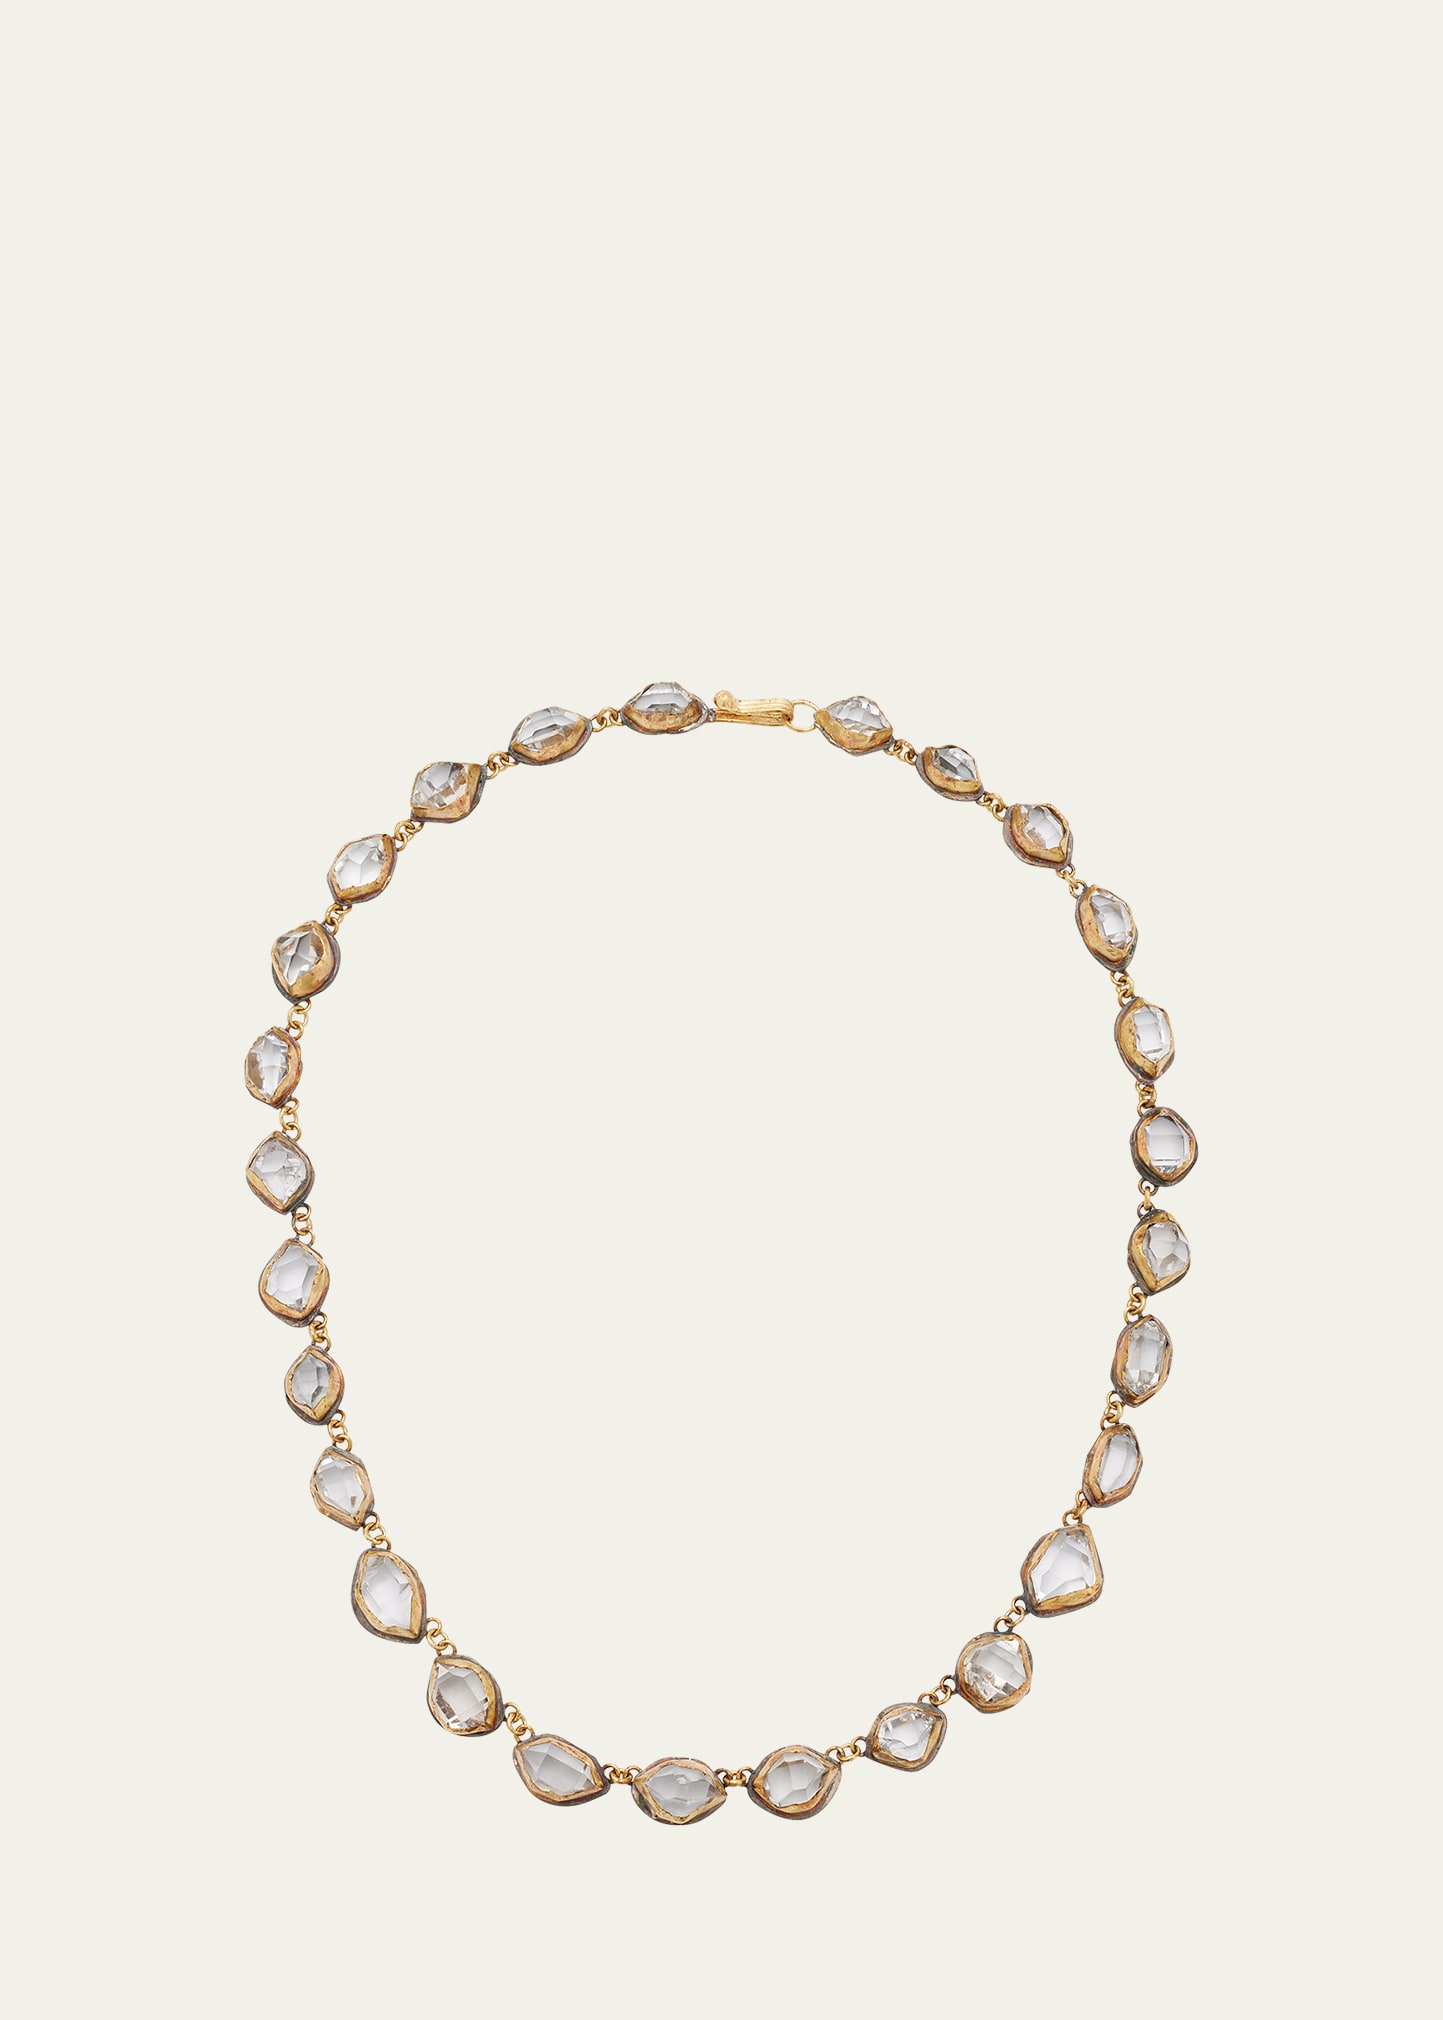 JUDY GEIB Herkimer Diamond Necklace in 18K Gold and Silver